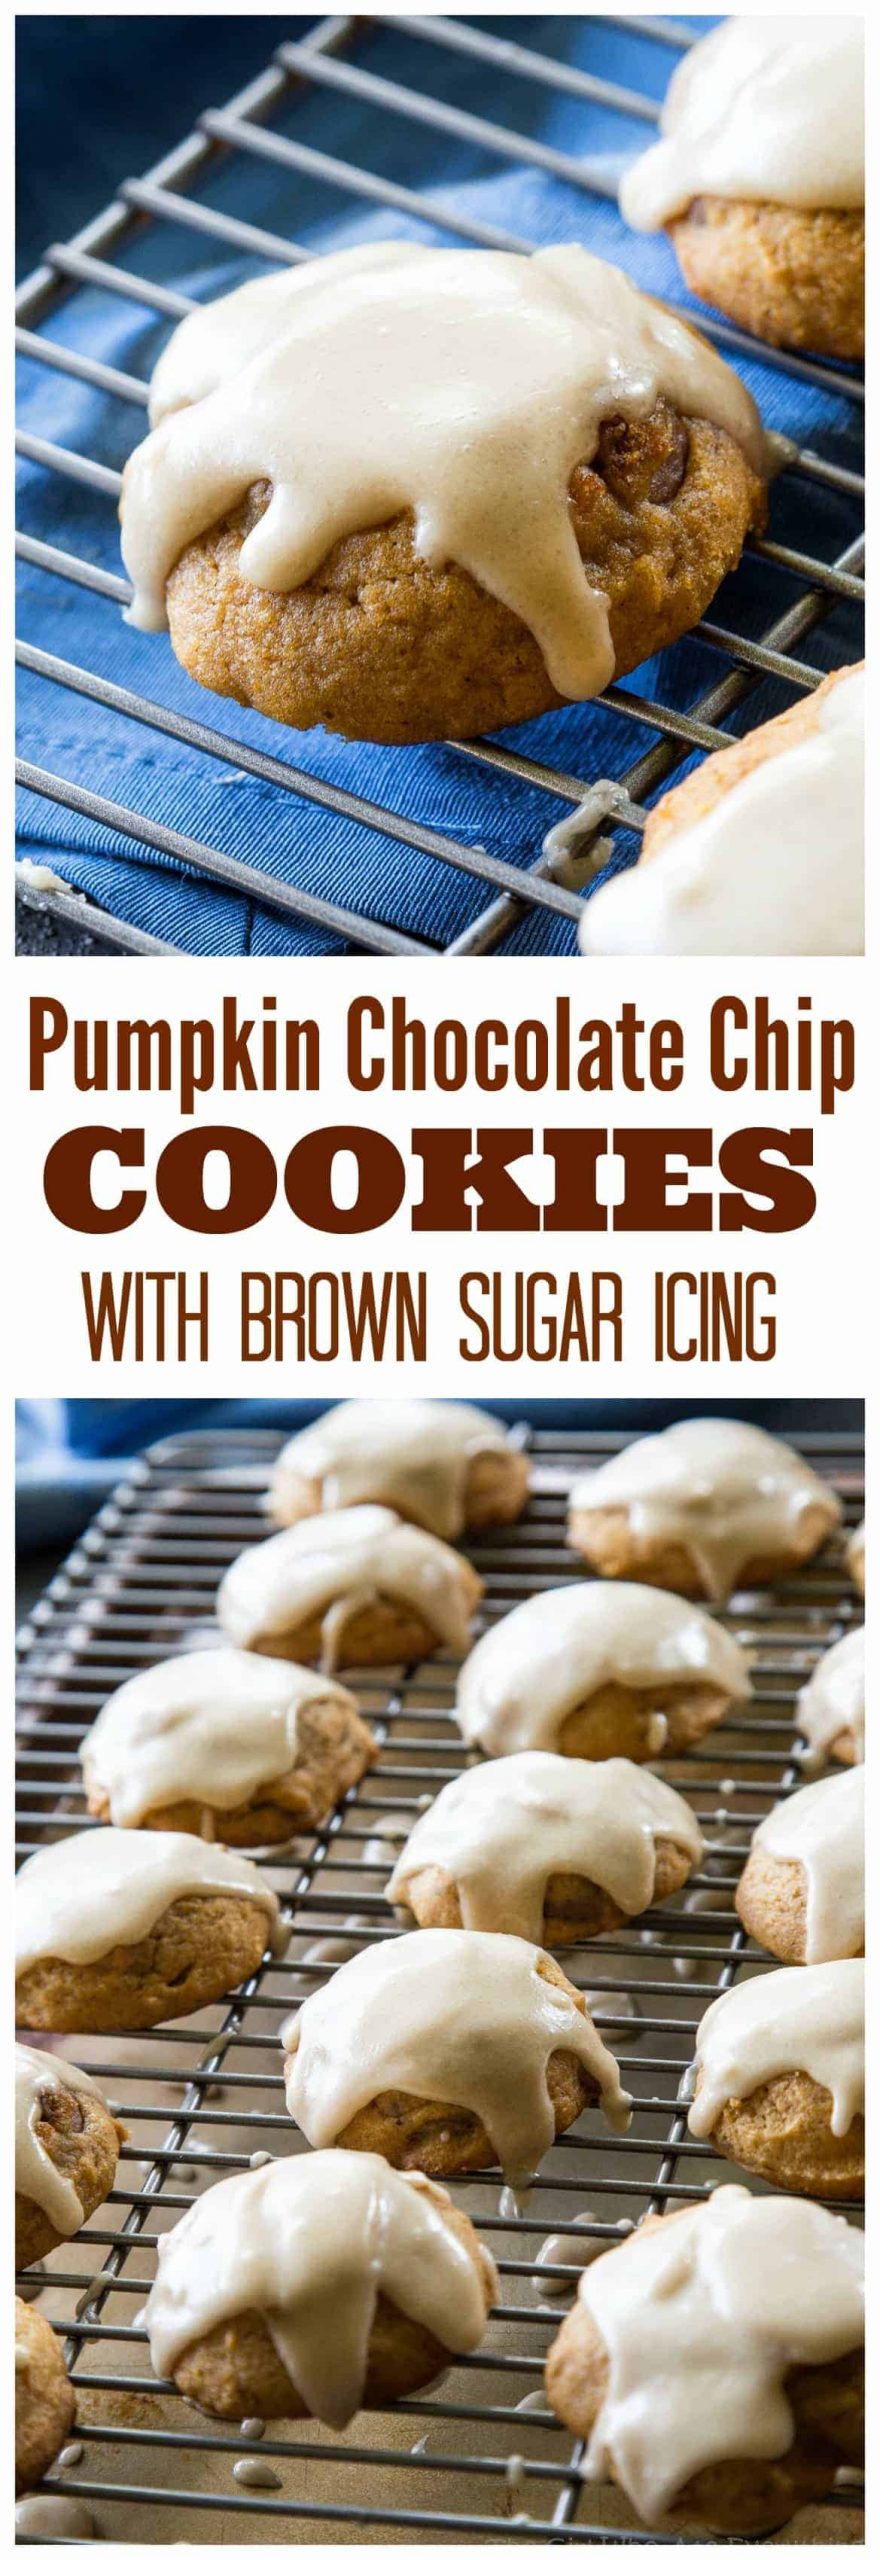 Pumpkin Chocolate Chip Cookies - these soft pumpkin cookies will be a fall favorite every year. #pumpkin #brownsugar #chocolatechip #cookies